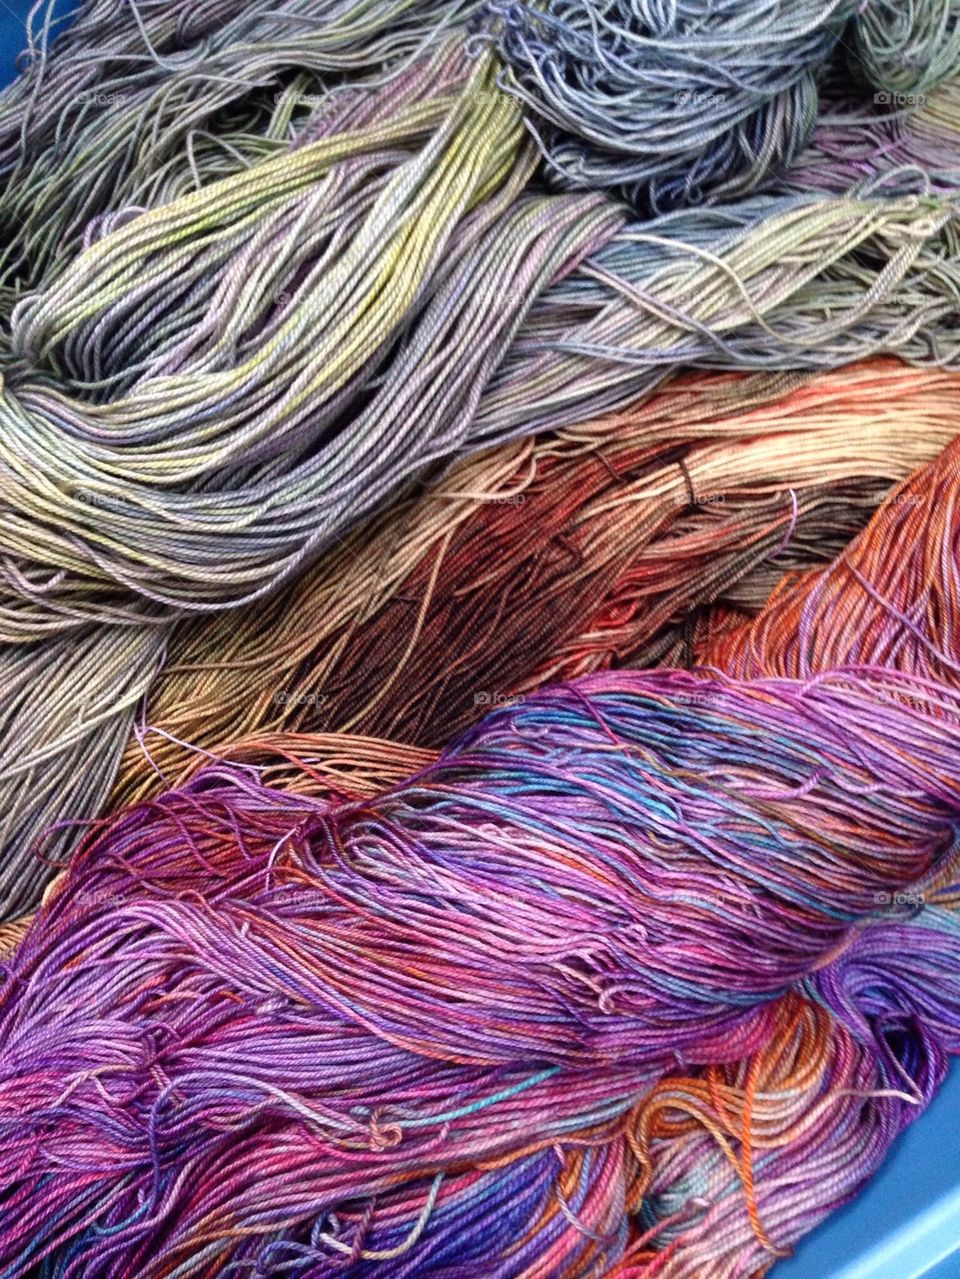 Hand- dyed yarn, waiting to be twisted into hanks.